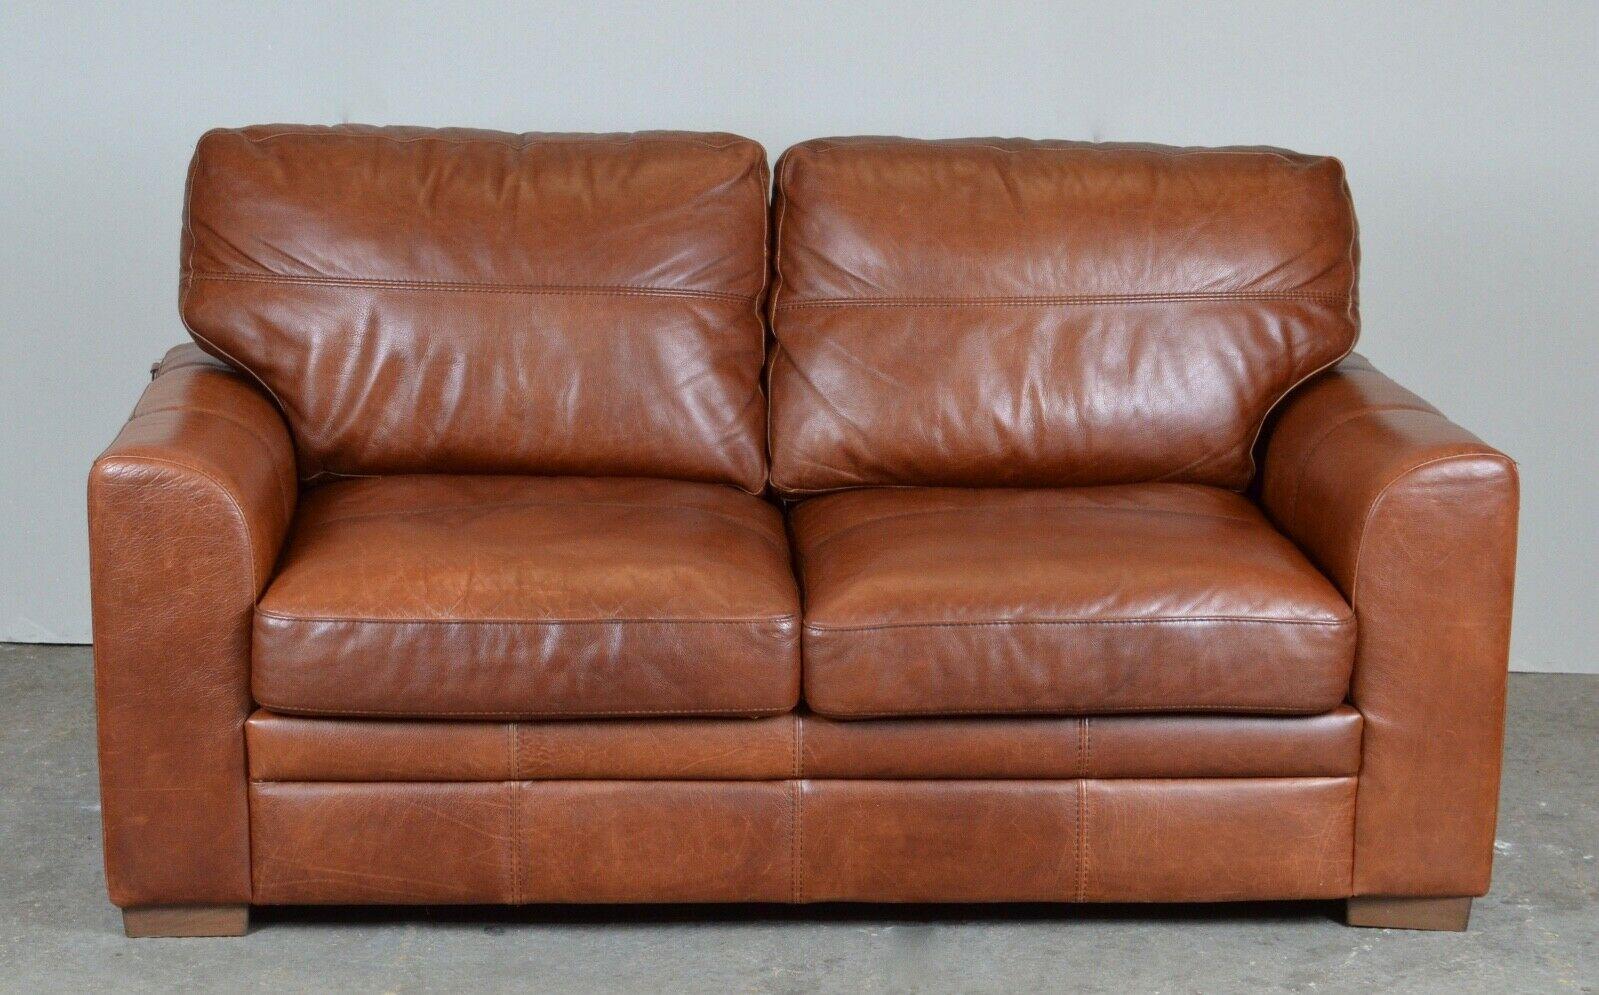 We are delighted to offer for sale this luxury Viva Italian designer tan leather sofa.
A stunning designer collection with boastful proportions. This sofa range features large arms with deep seats and extra sumptuous sink into luxurious cushions